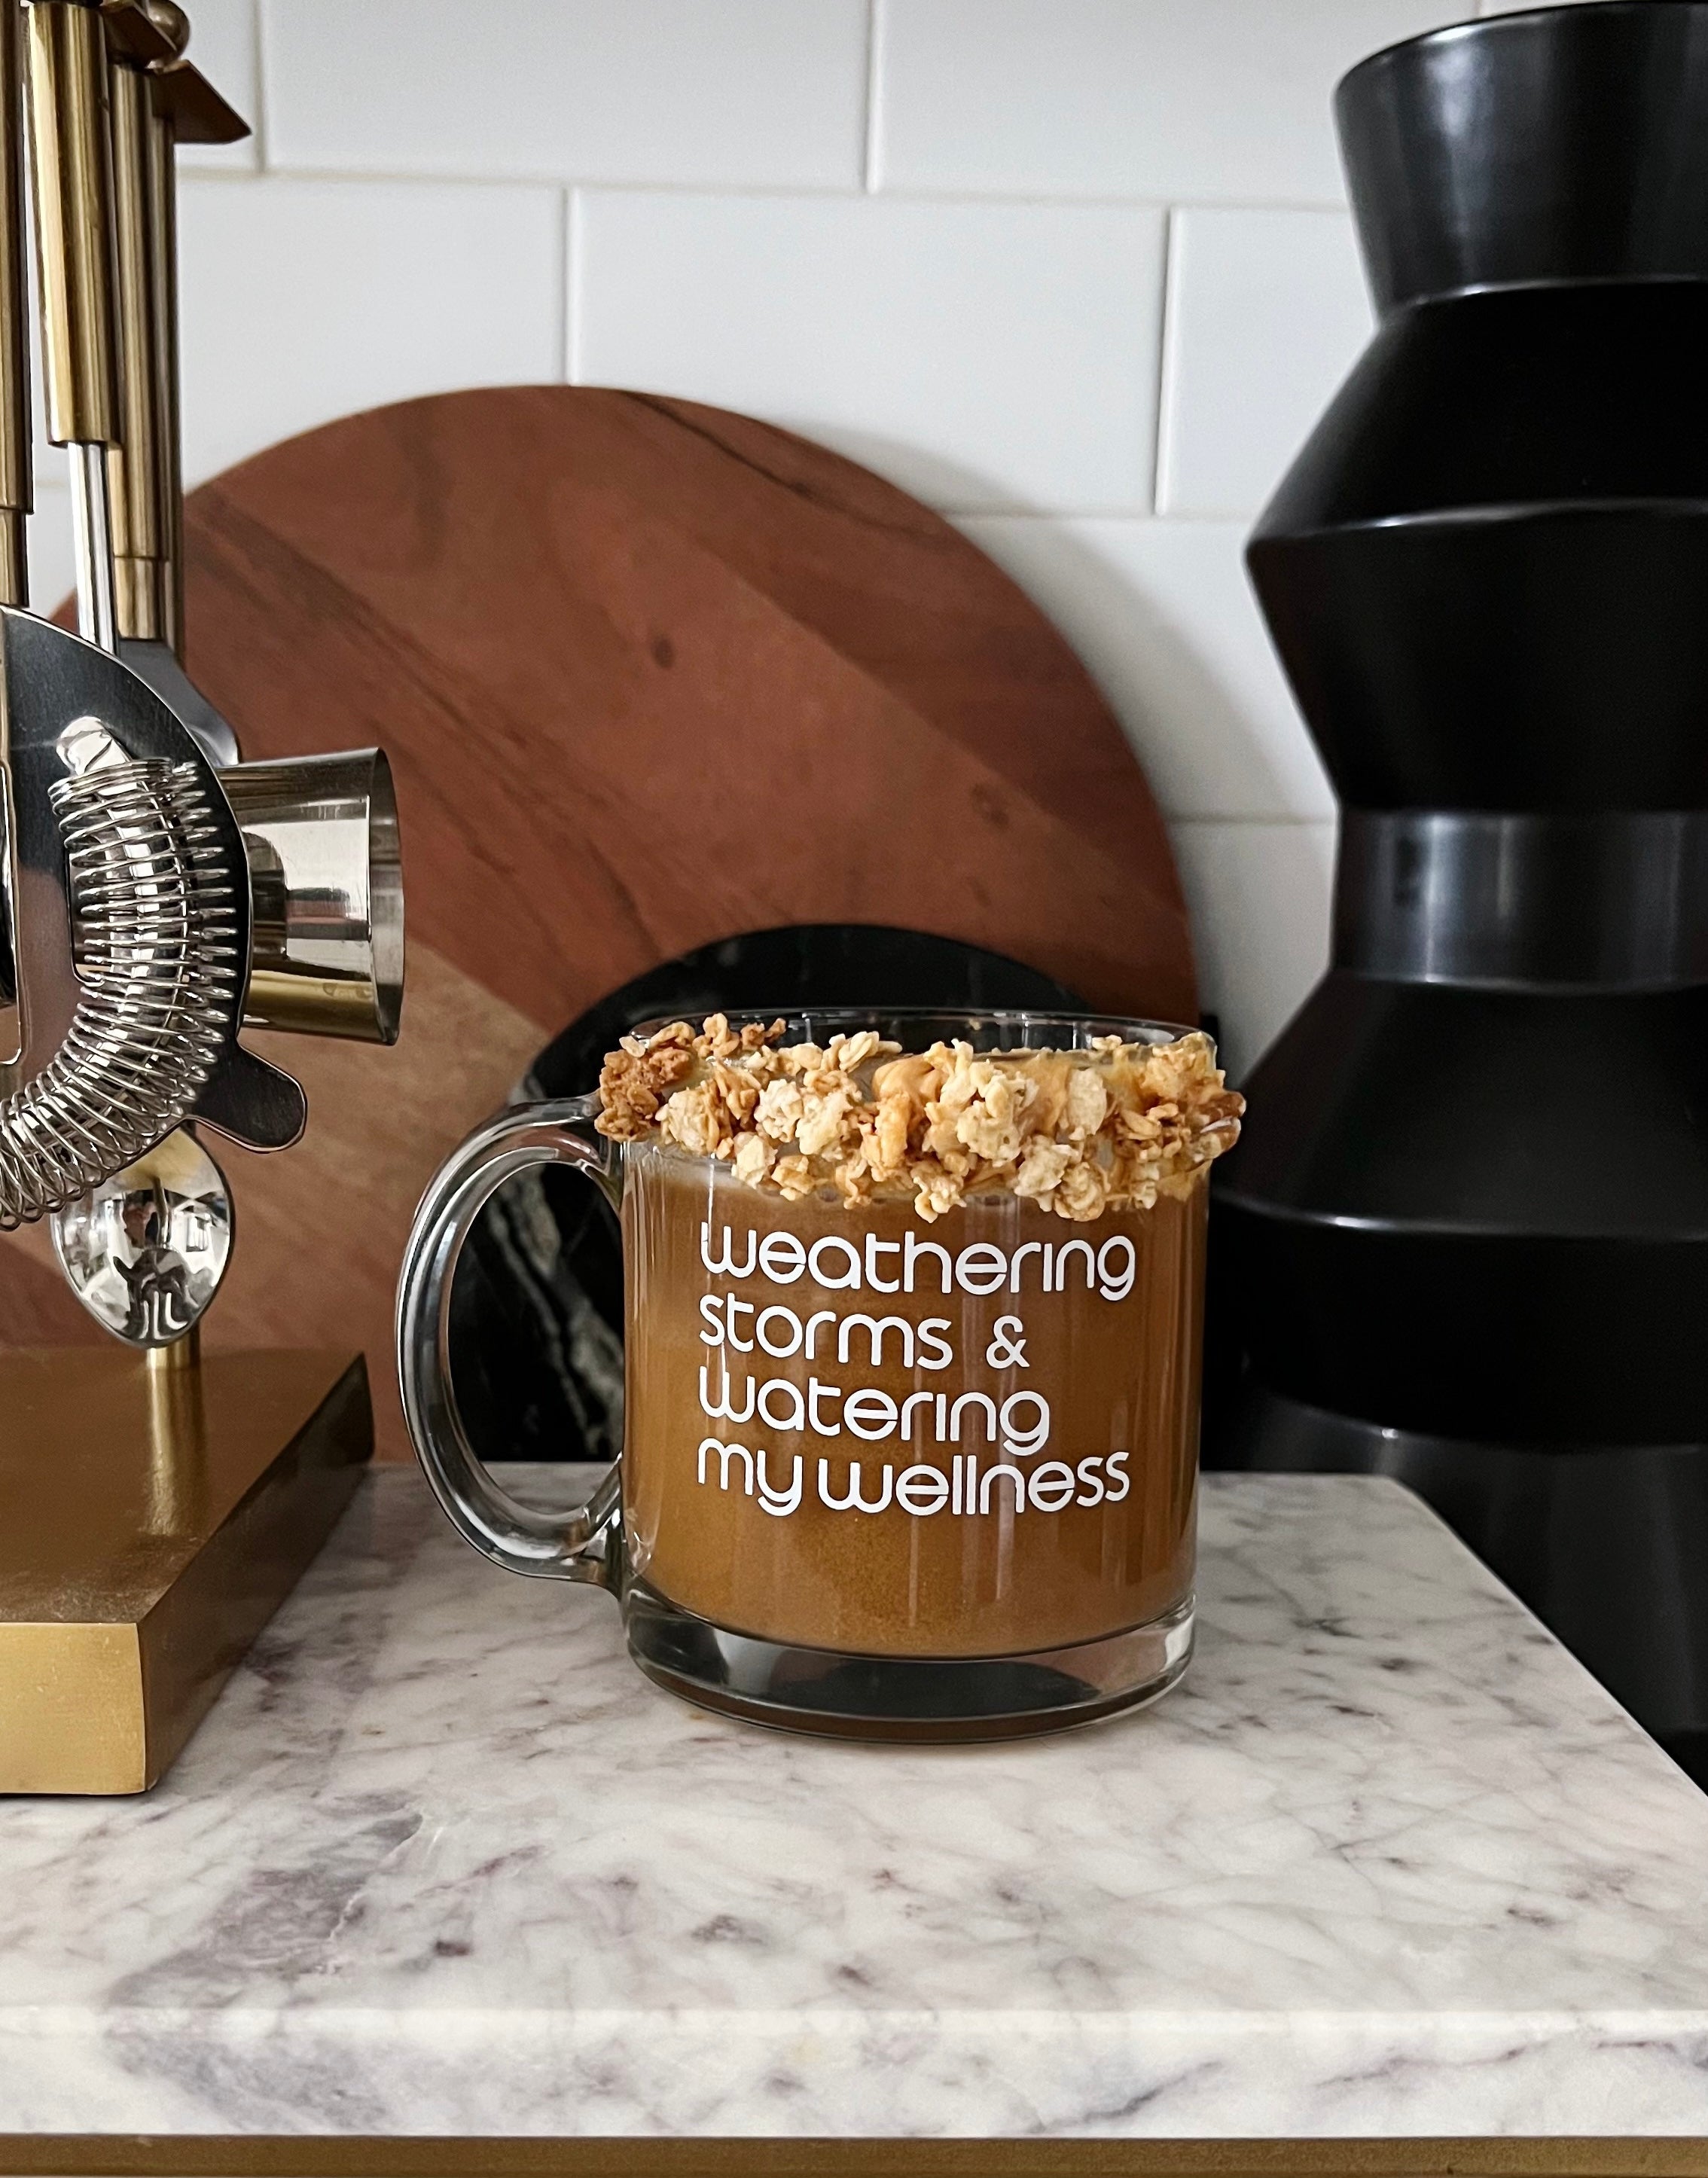 13 Reasons Why You Should Be Using Glass Coffee Mugs – EcoRoots